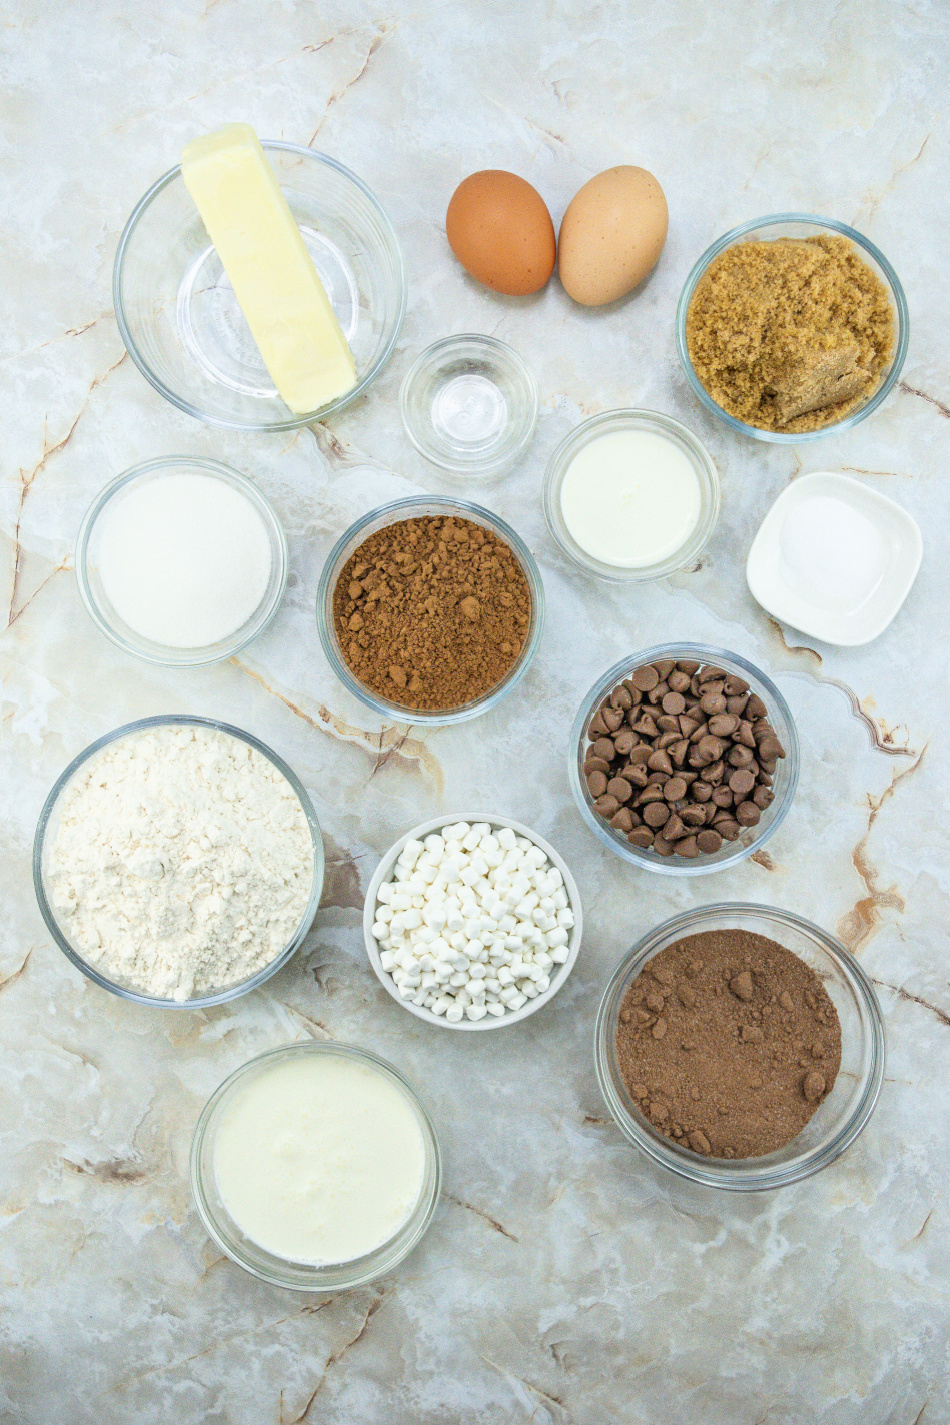 Hot cocoa cookie ingredients